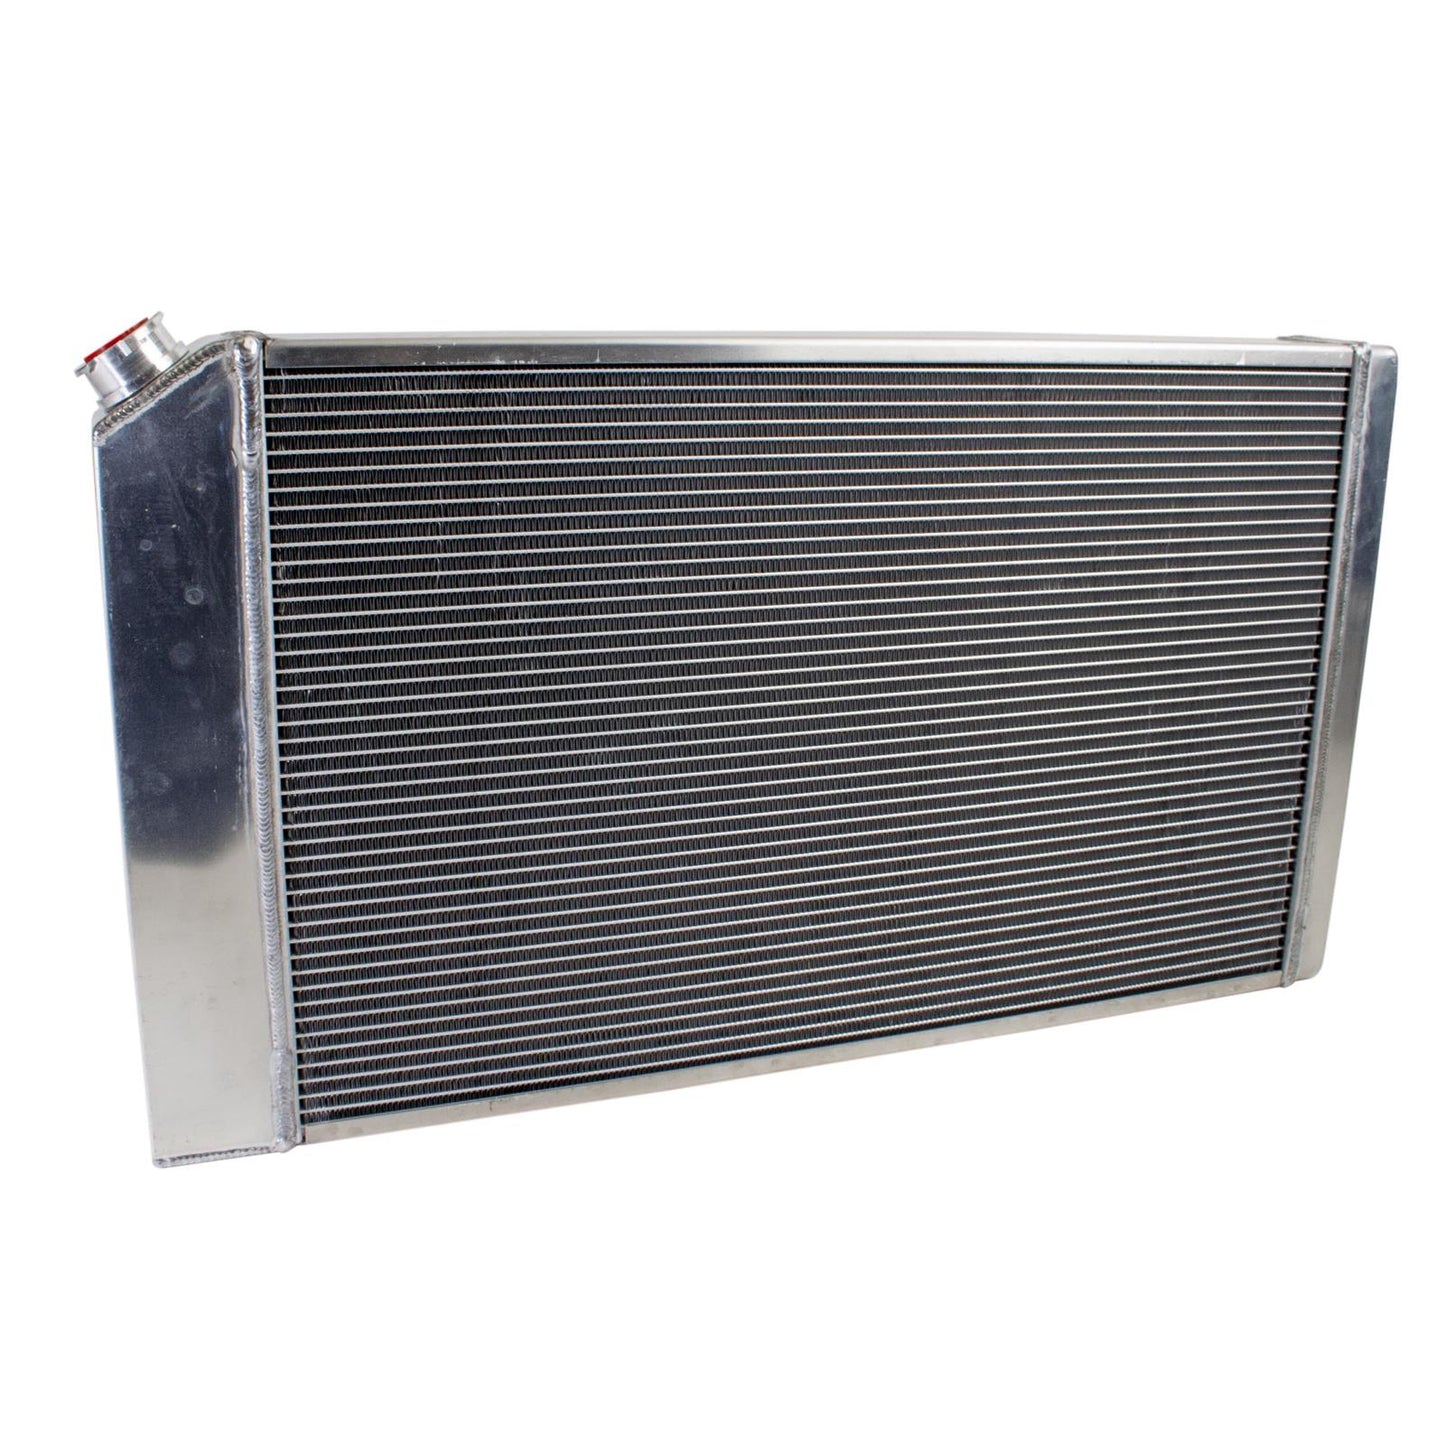 Griffin Performance Fit Radiator Combos CU-70008-LS for 1977-1988 Buick, Cadillac, Chevy, Oldsmobile, Pontiac